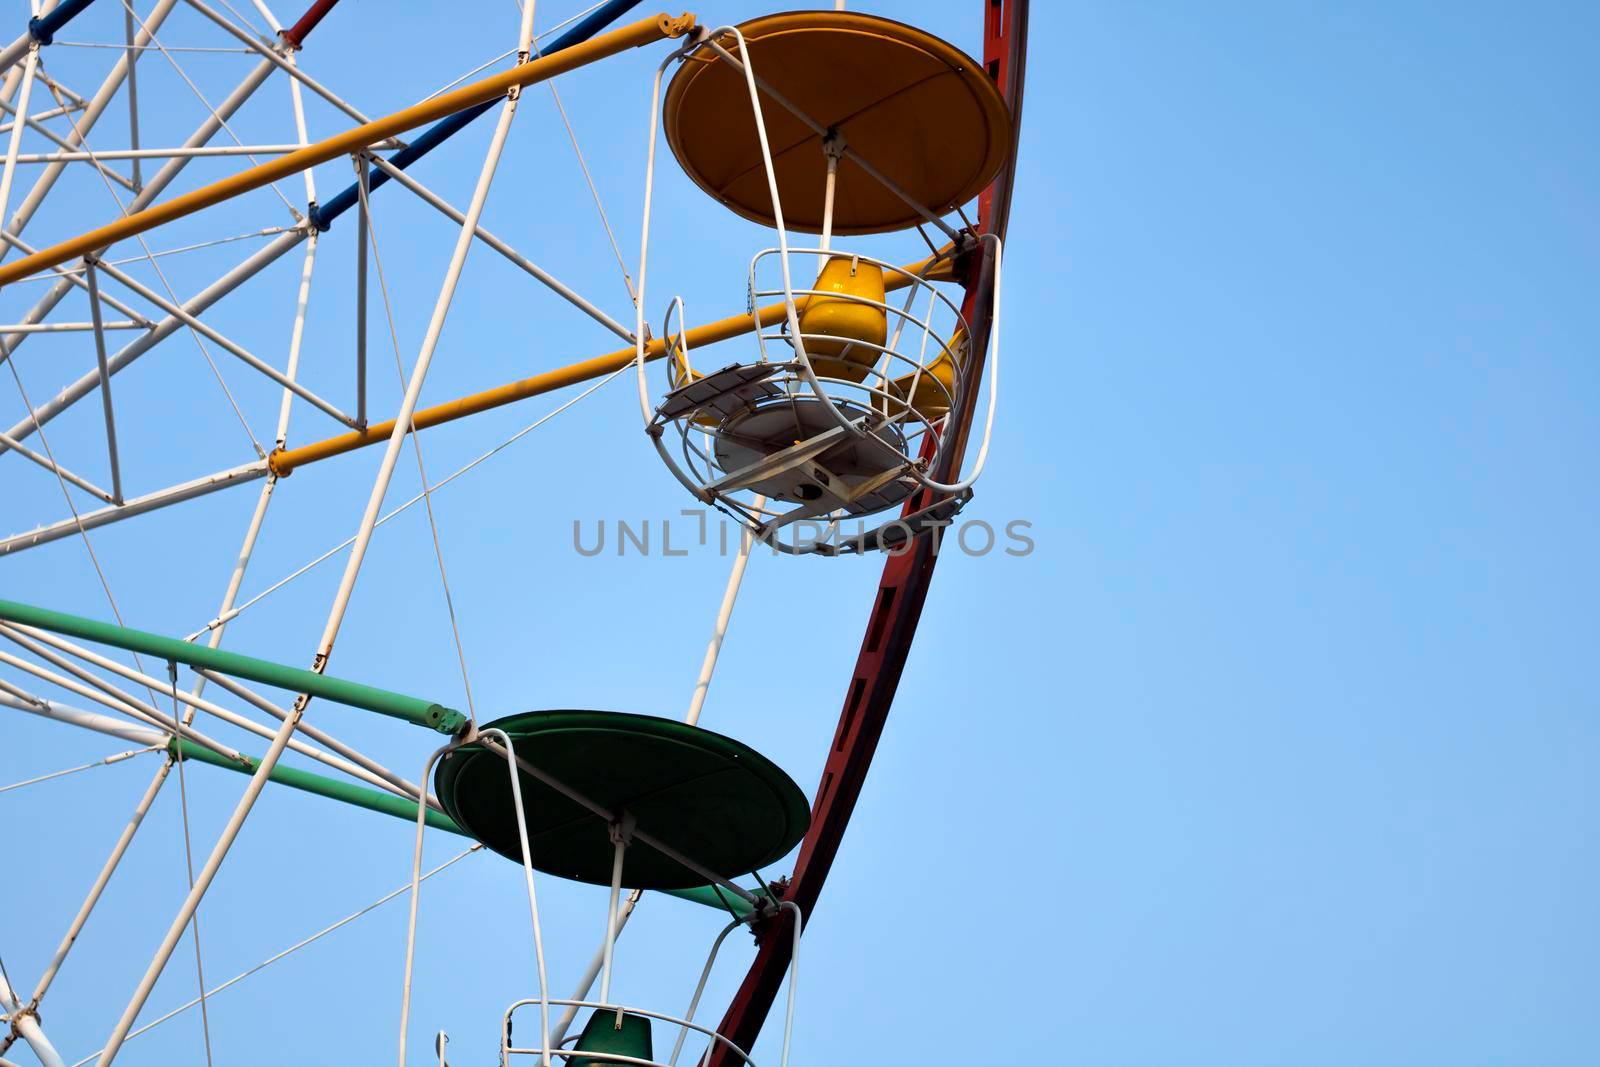 Close-up of a multi-colored Ferris wheel in an amusement park against a background of blue sky